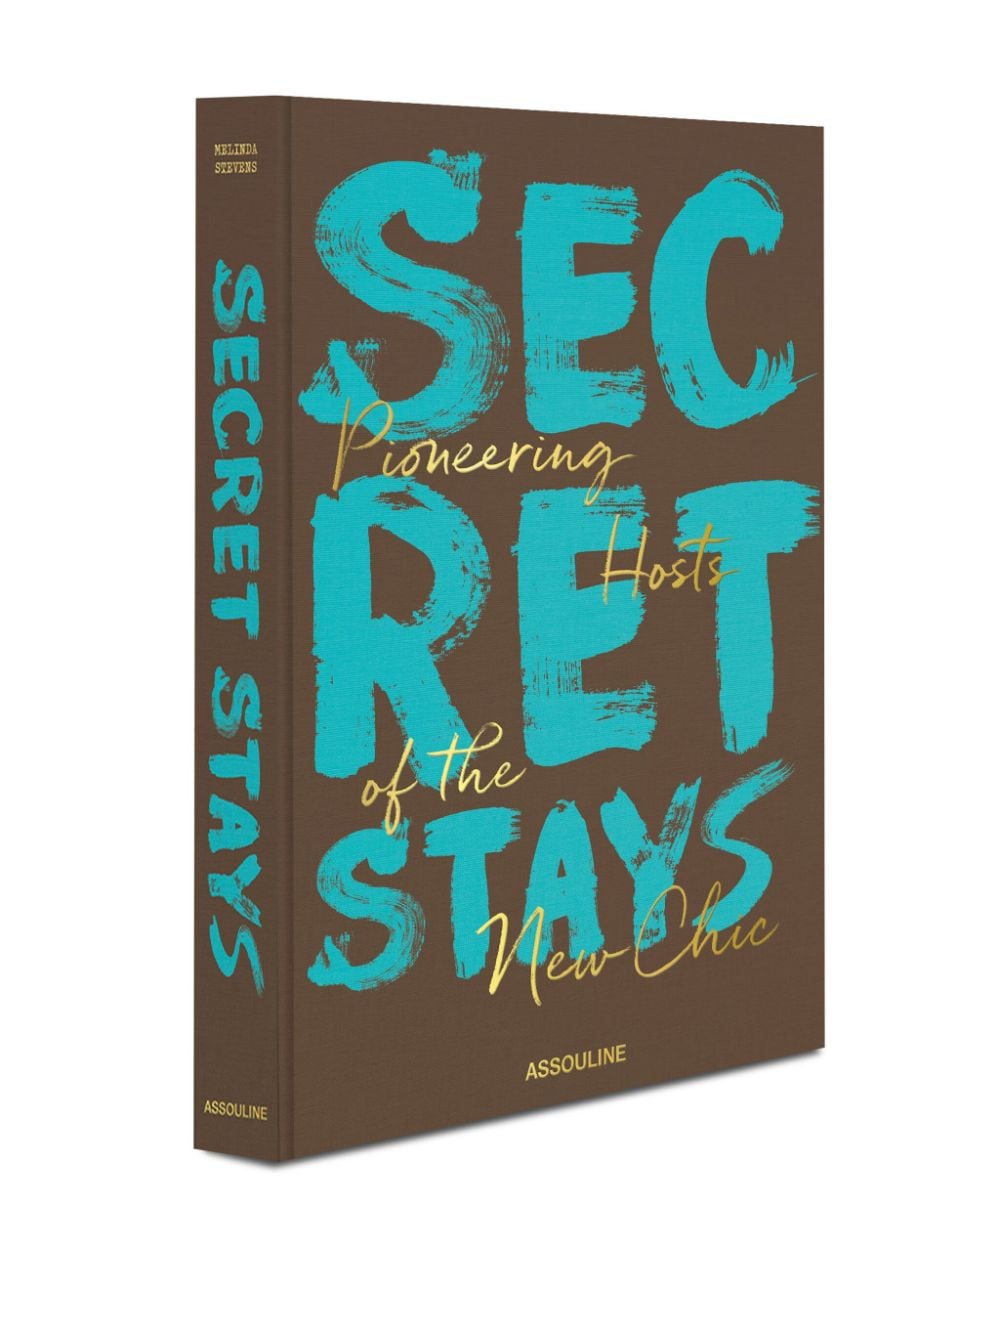 Assouline ASSOULINE- Secret Stays, Pioneering Host Of The New Chic Book